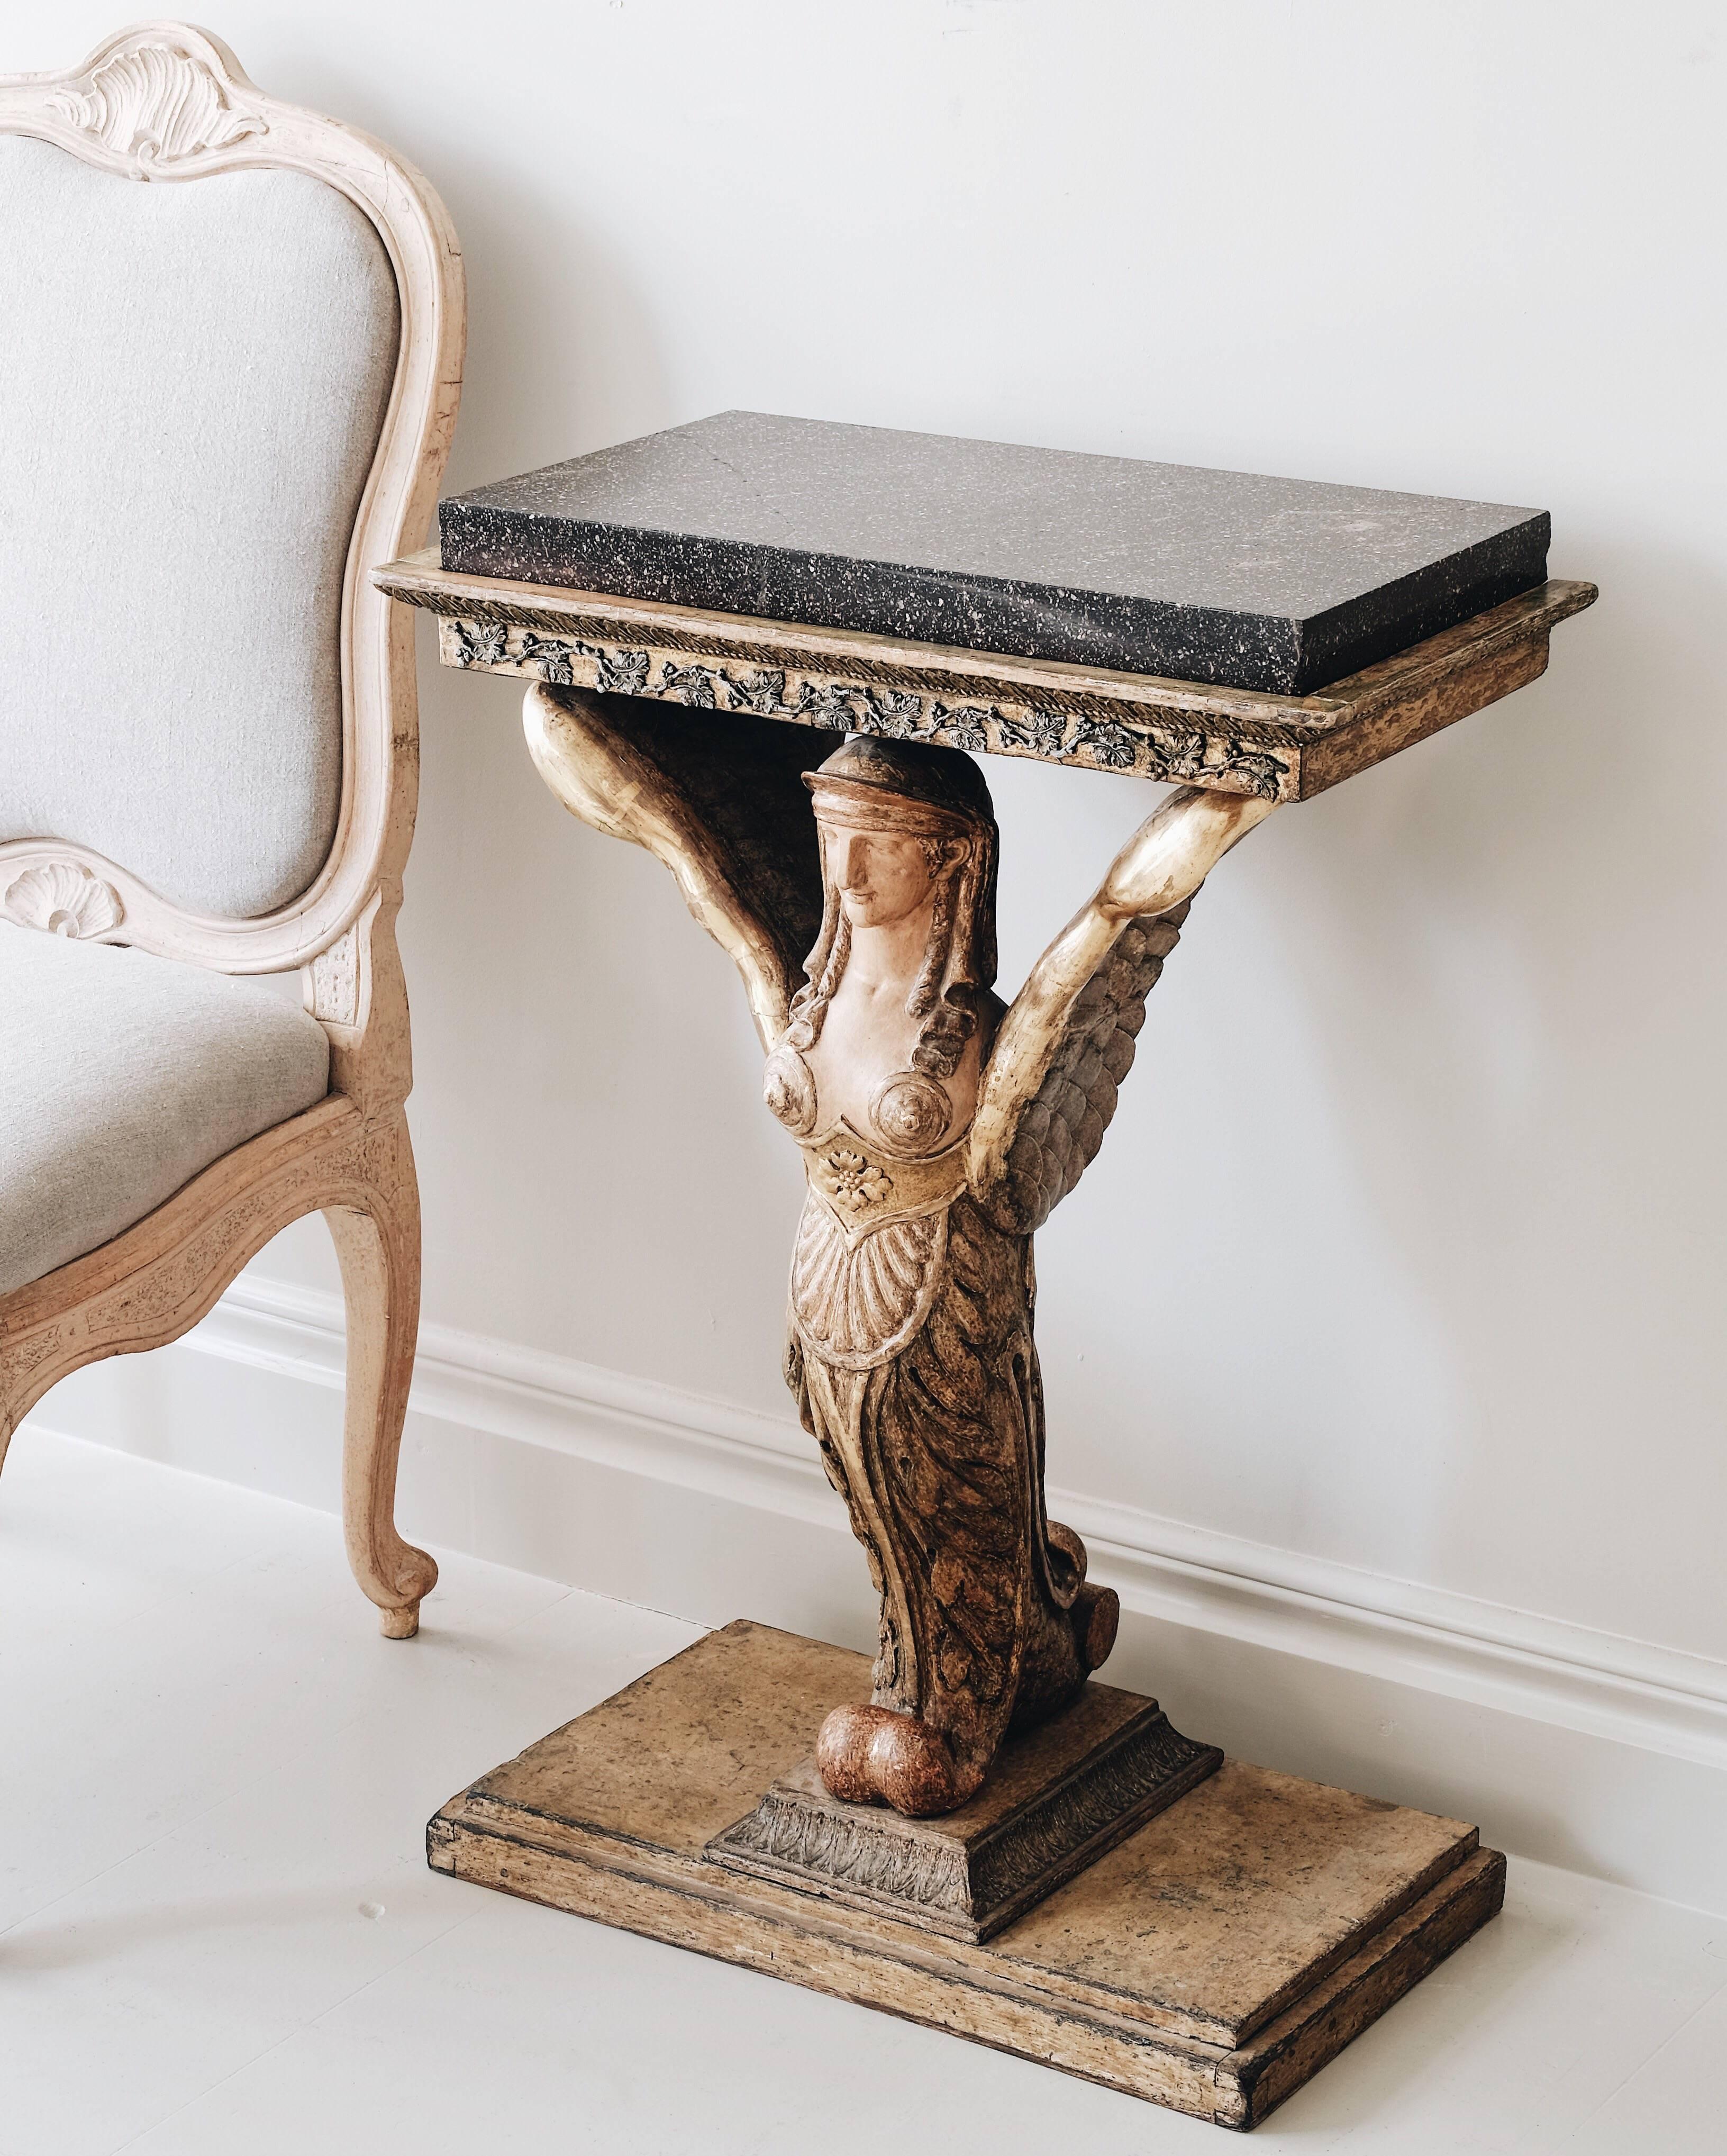 Exceptional early 19th century Late Gustavian console table with porphyry top, Gothenburg, circa 1815. Attributed to Pehr Gustaf Bylander. (master sculpture and mirror maker 1810-1852)

Pehr Gustaf Bylander was a mirror-maker in Gothenburg active